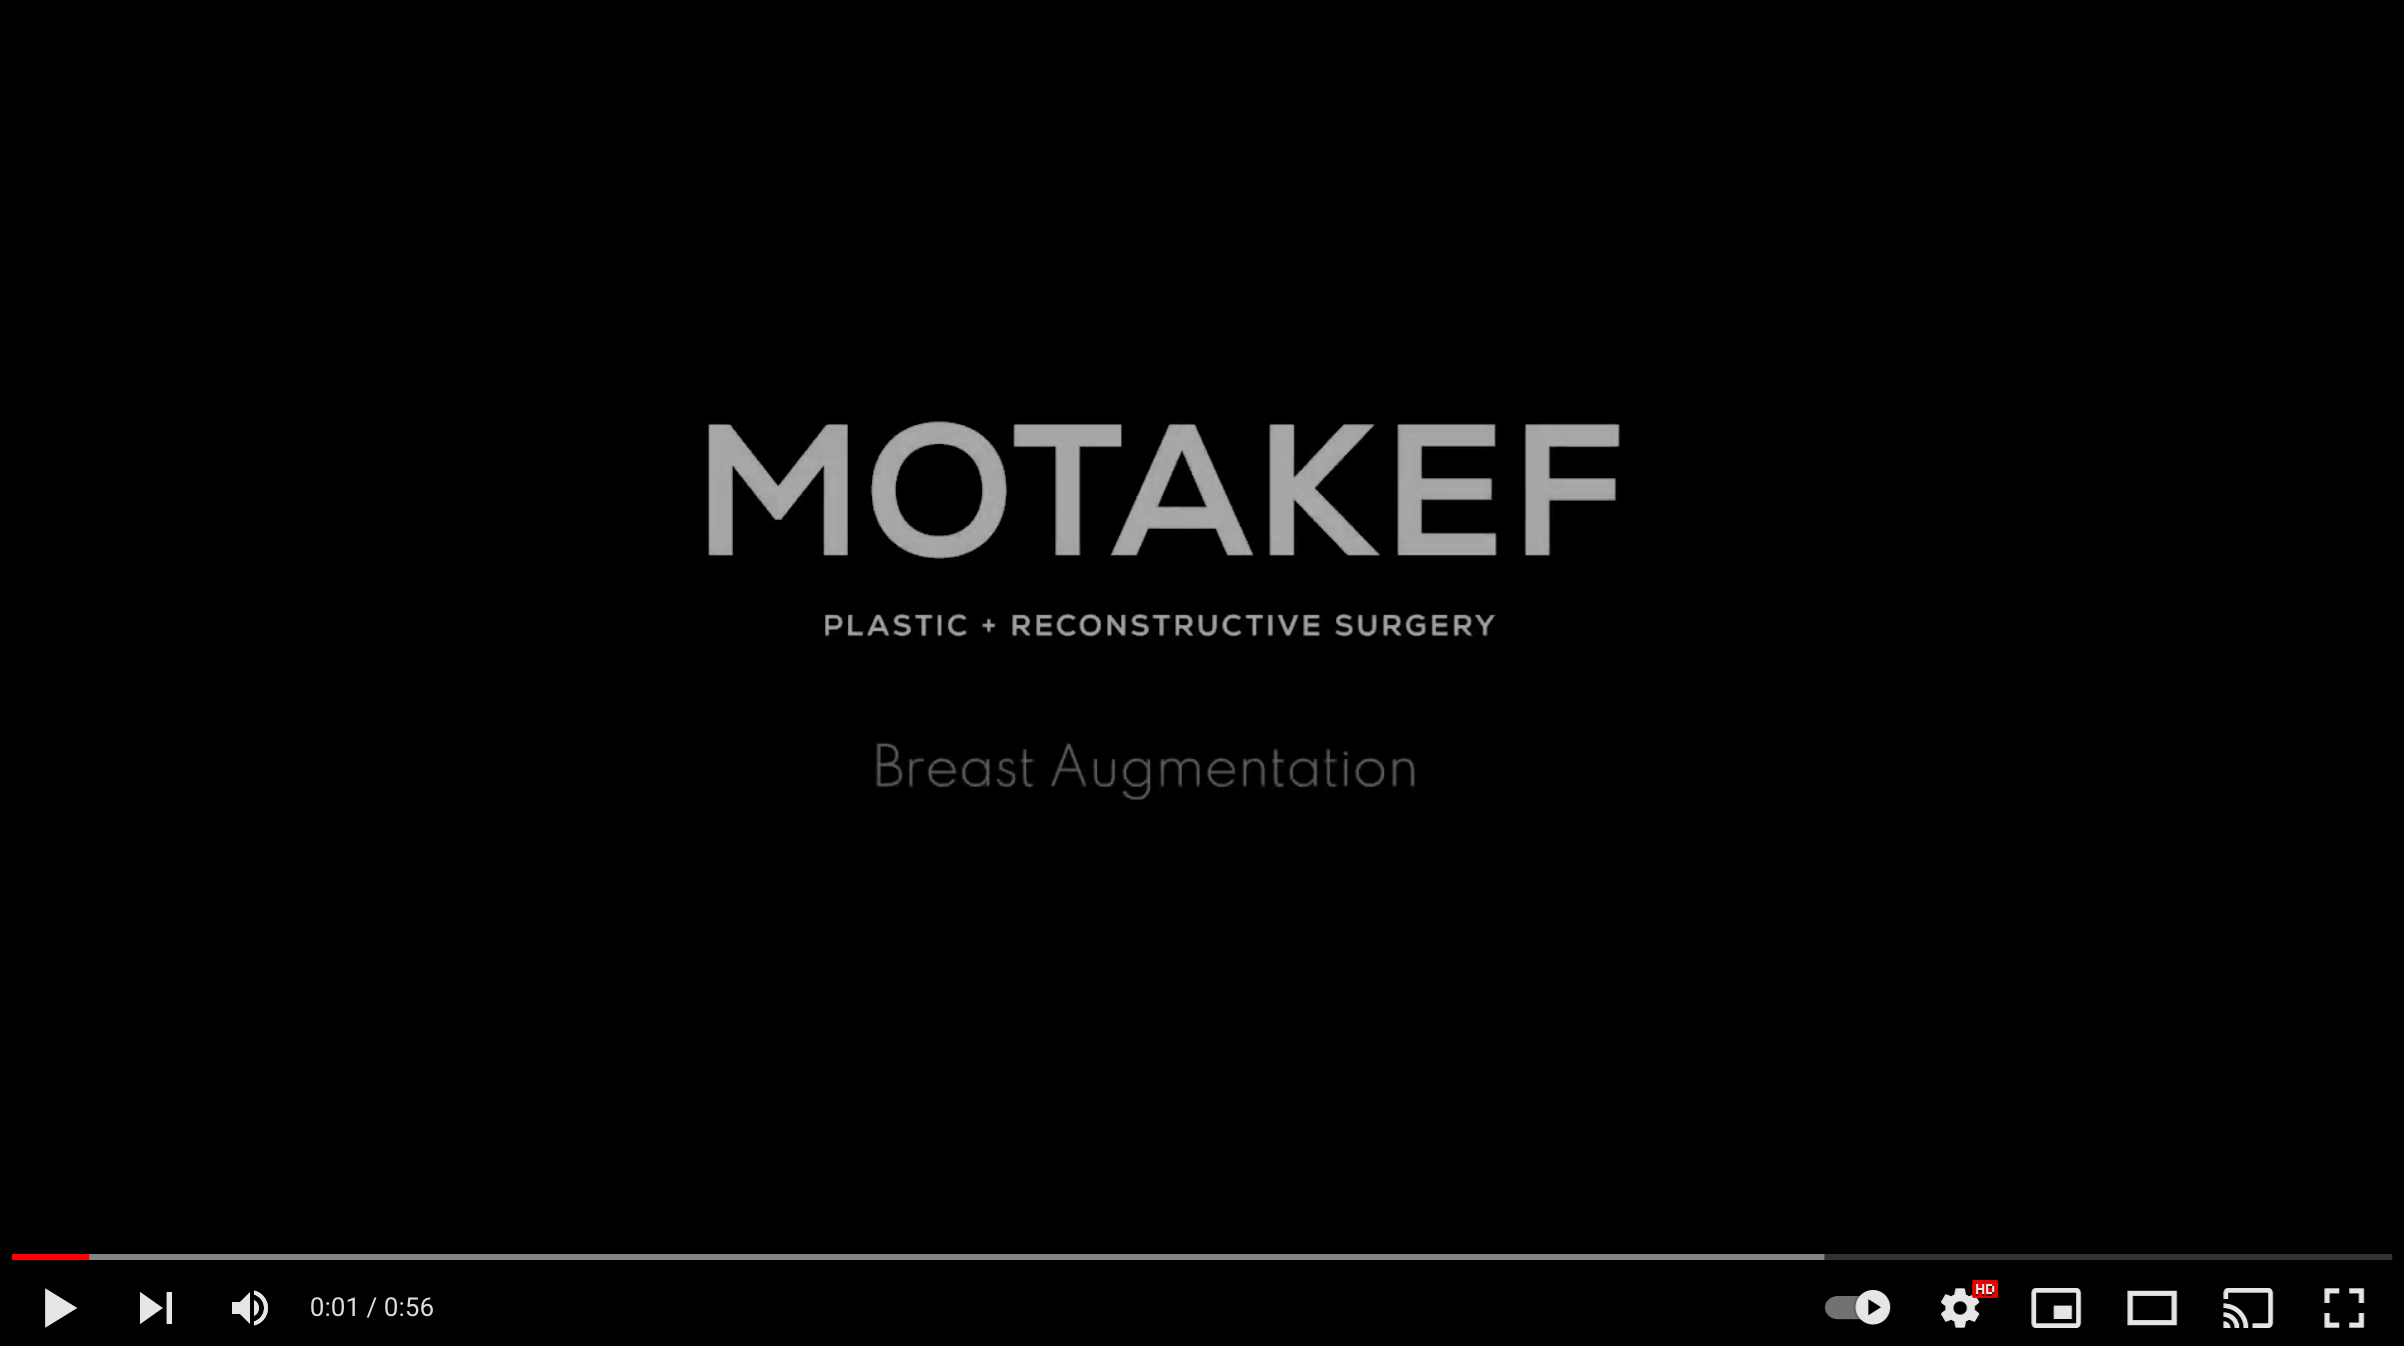 Breast Augmentation at Motakef Plastic and Reconstructive Surgery